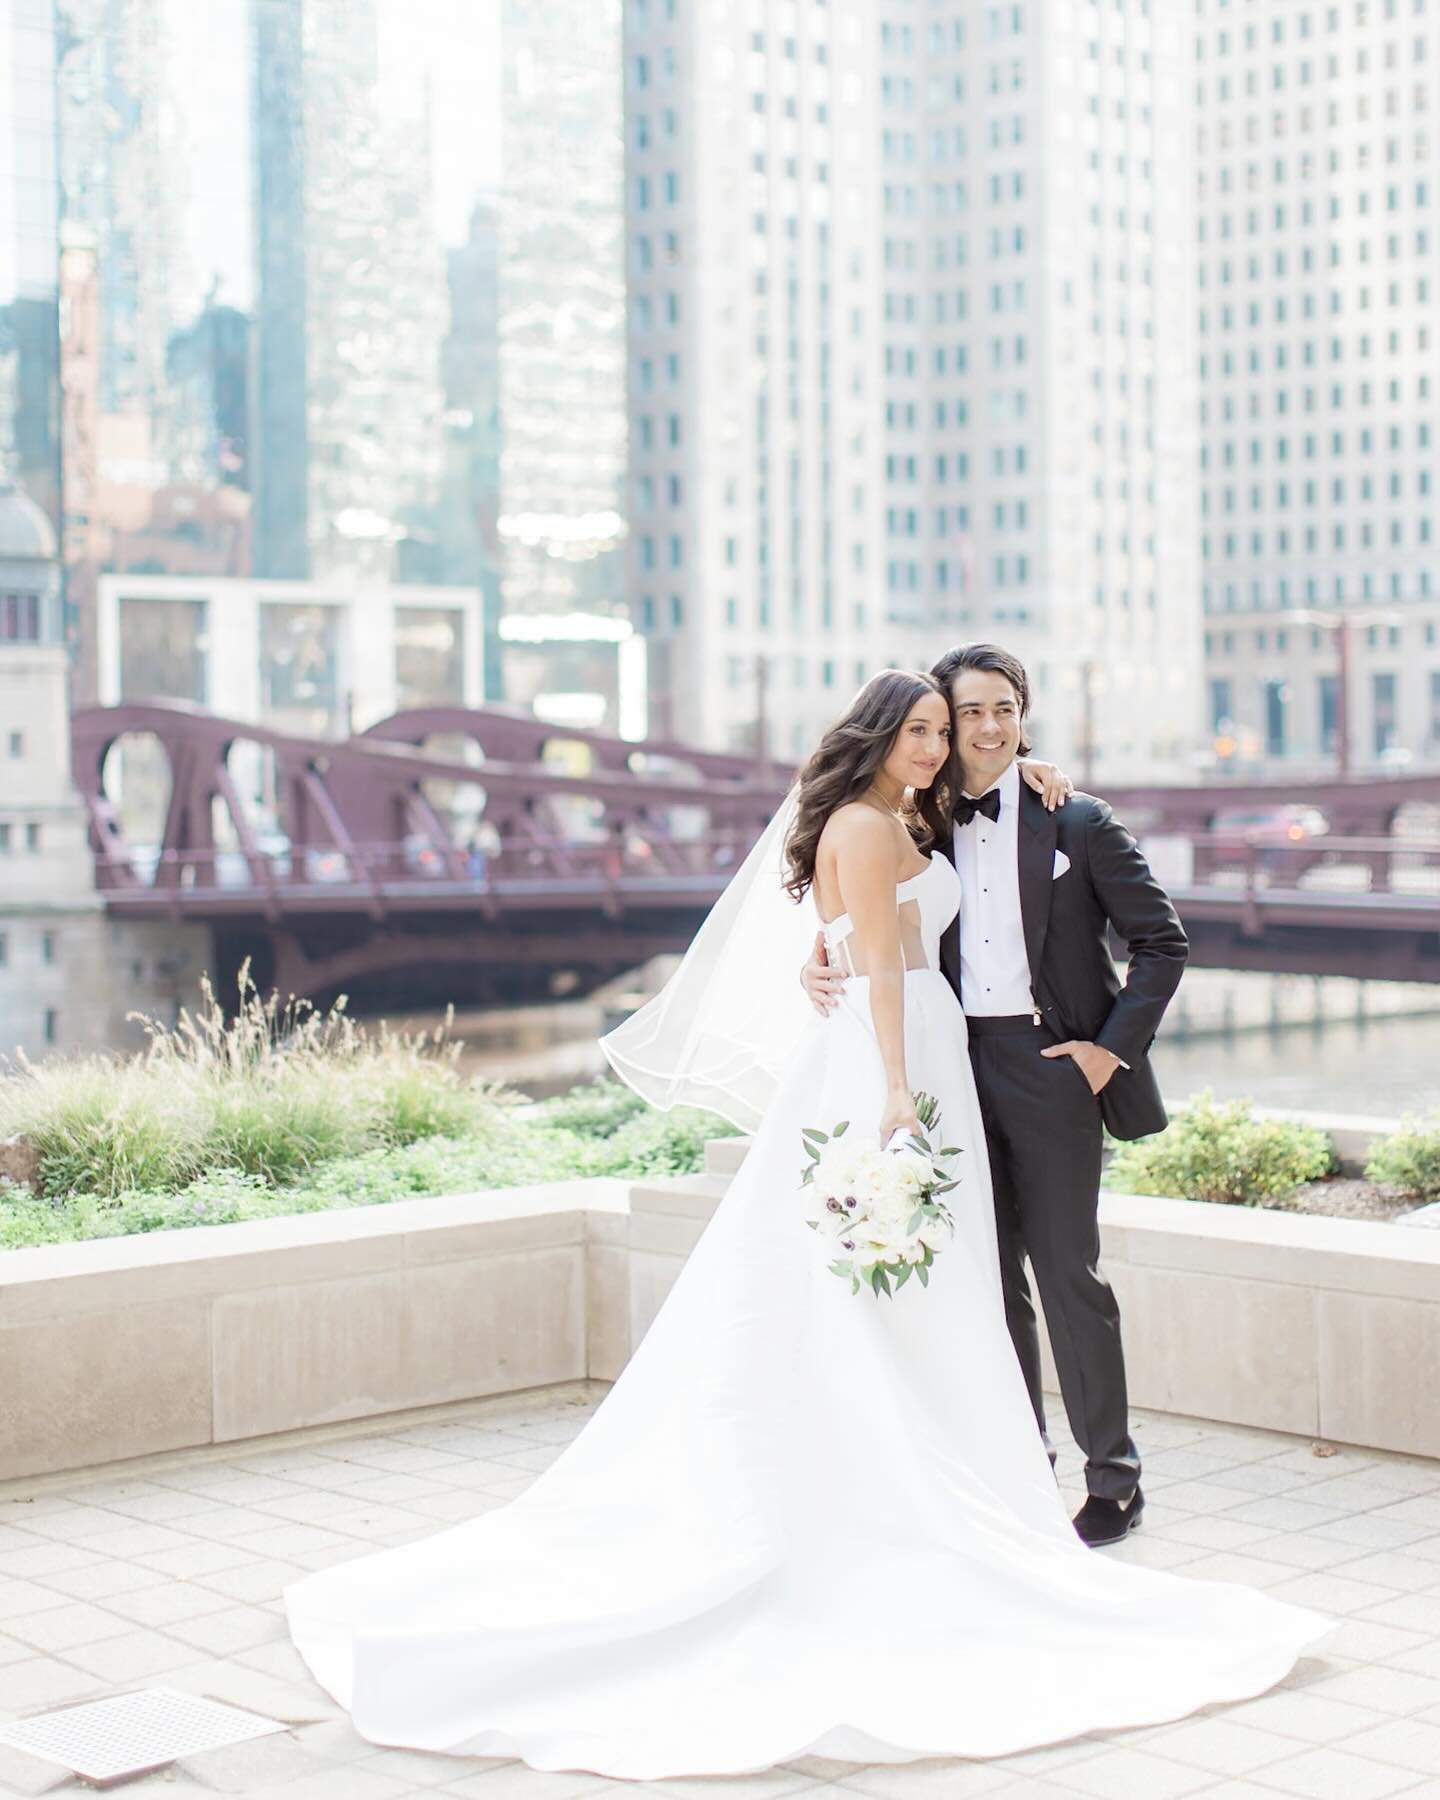 ✨Wishing these two a very Happy 6 month Anniversary ✨🥂A day late but what they hay?!?!😉🥰
&bull;
&bull;
&bull;
&bull;
&bull;
Planning @nsweevents 
Venue @chicagoculturalcenter
Catering @entertaining_co
Floral @juliettanfloraldesign
Photo @laurawith